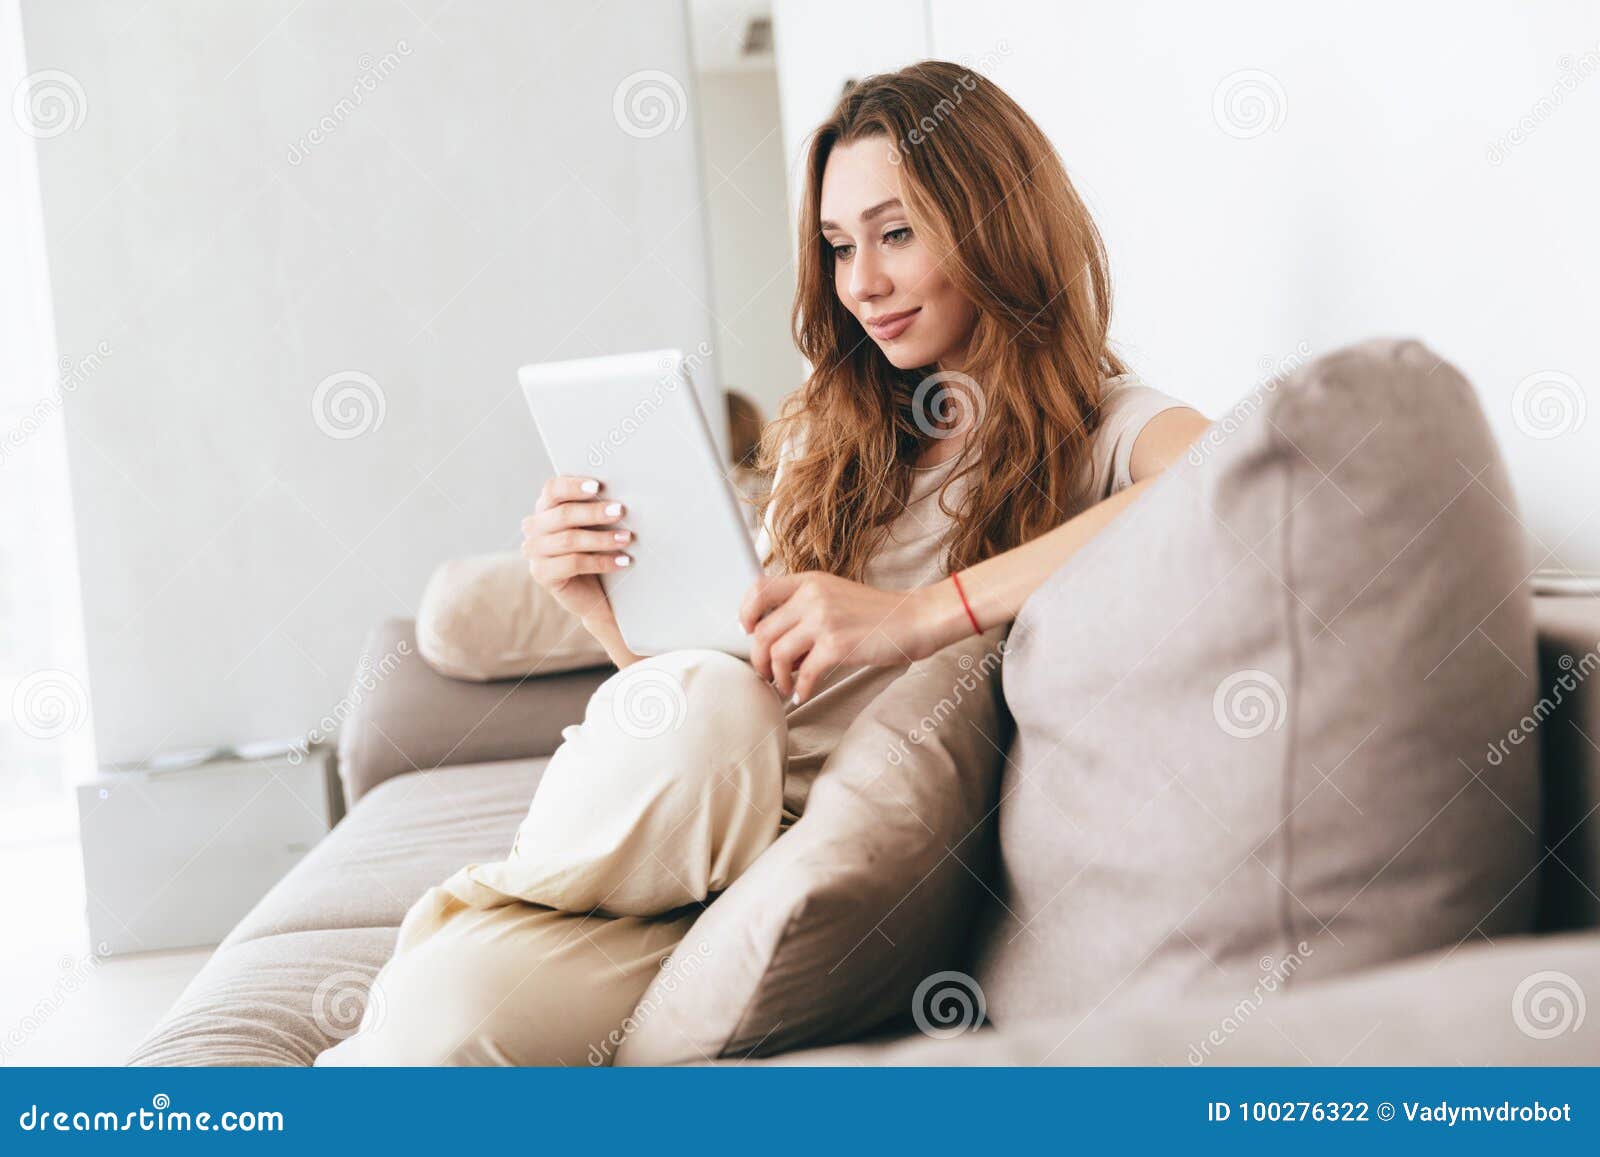 Amazing Pretty Lady Using Tablet Computer. Stock Photo - Image of happy ...